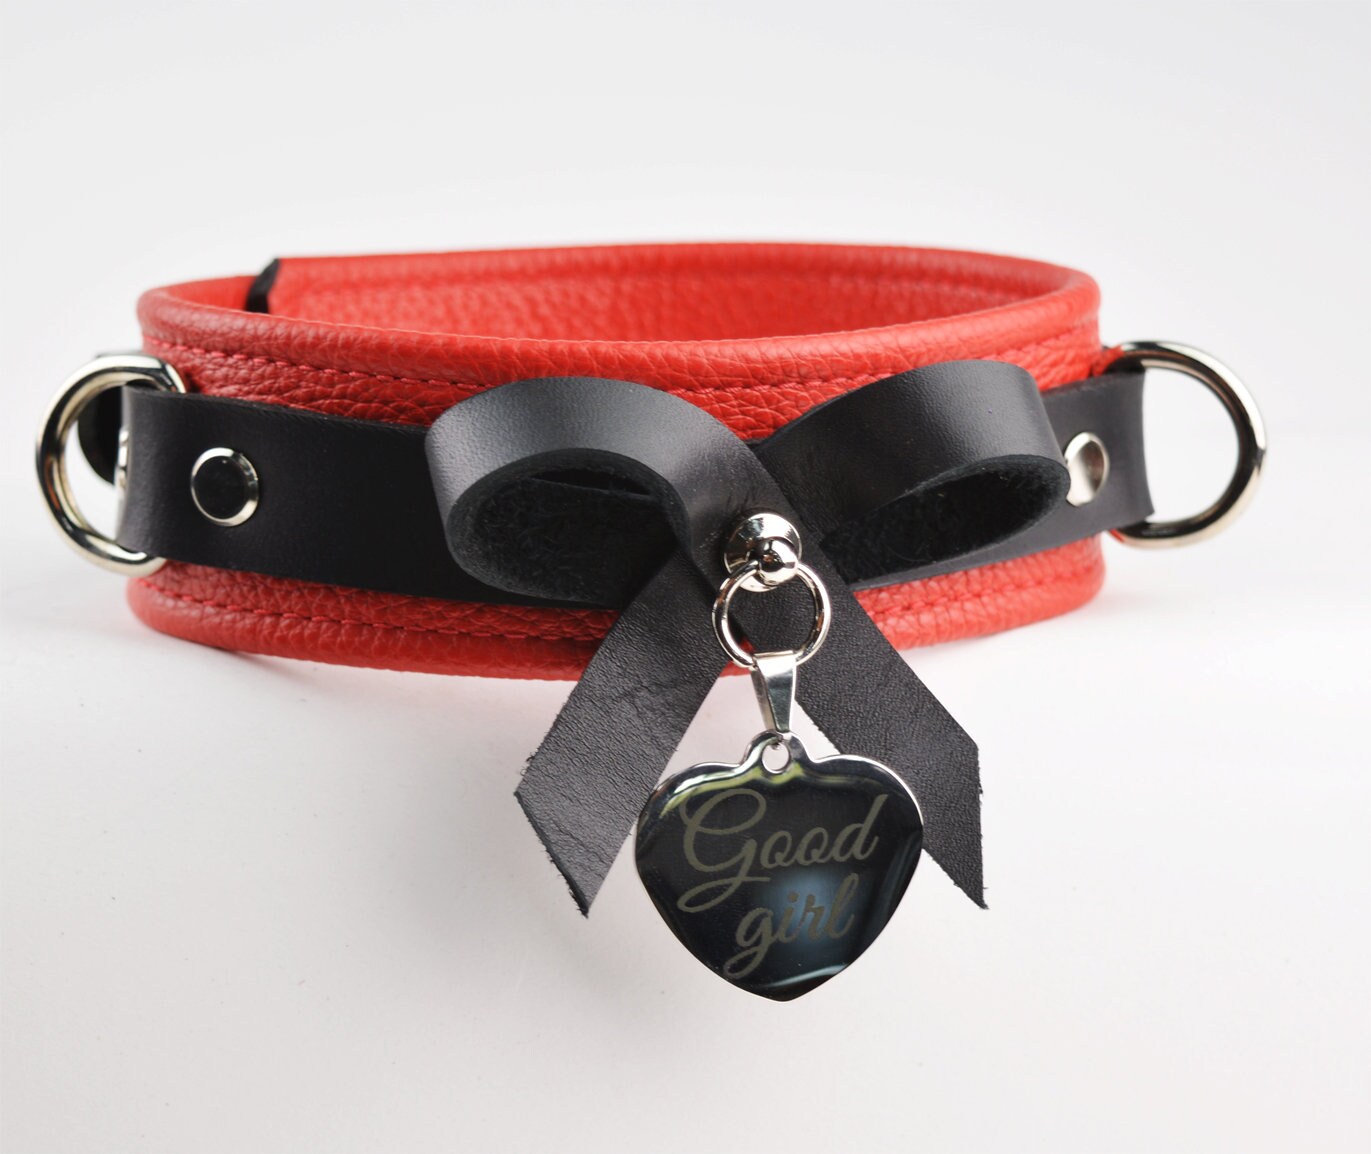 Premium BDSM Red Leather Bow Collar & Leash With Custom Engraved Gold  Pendant Handcrafted Col49rdgldpd 